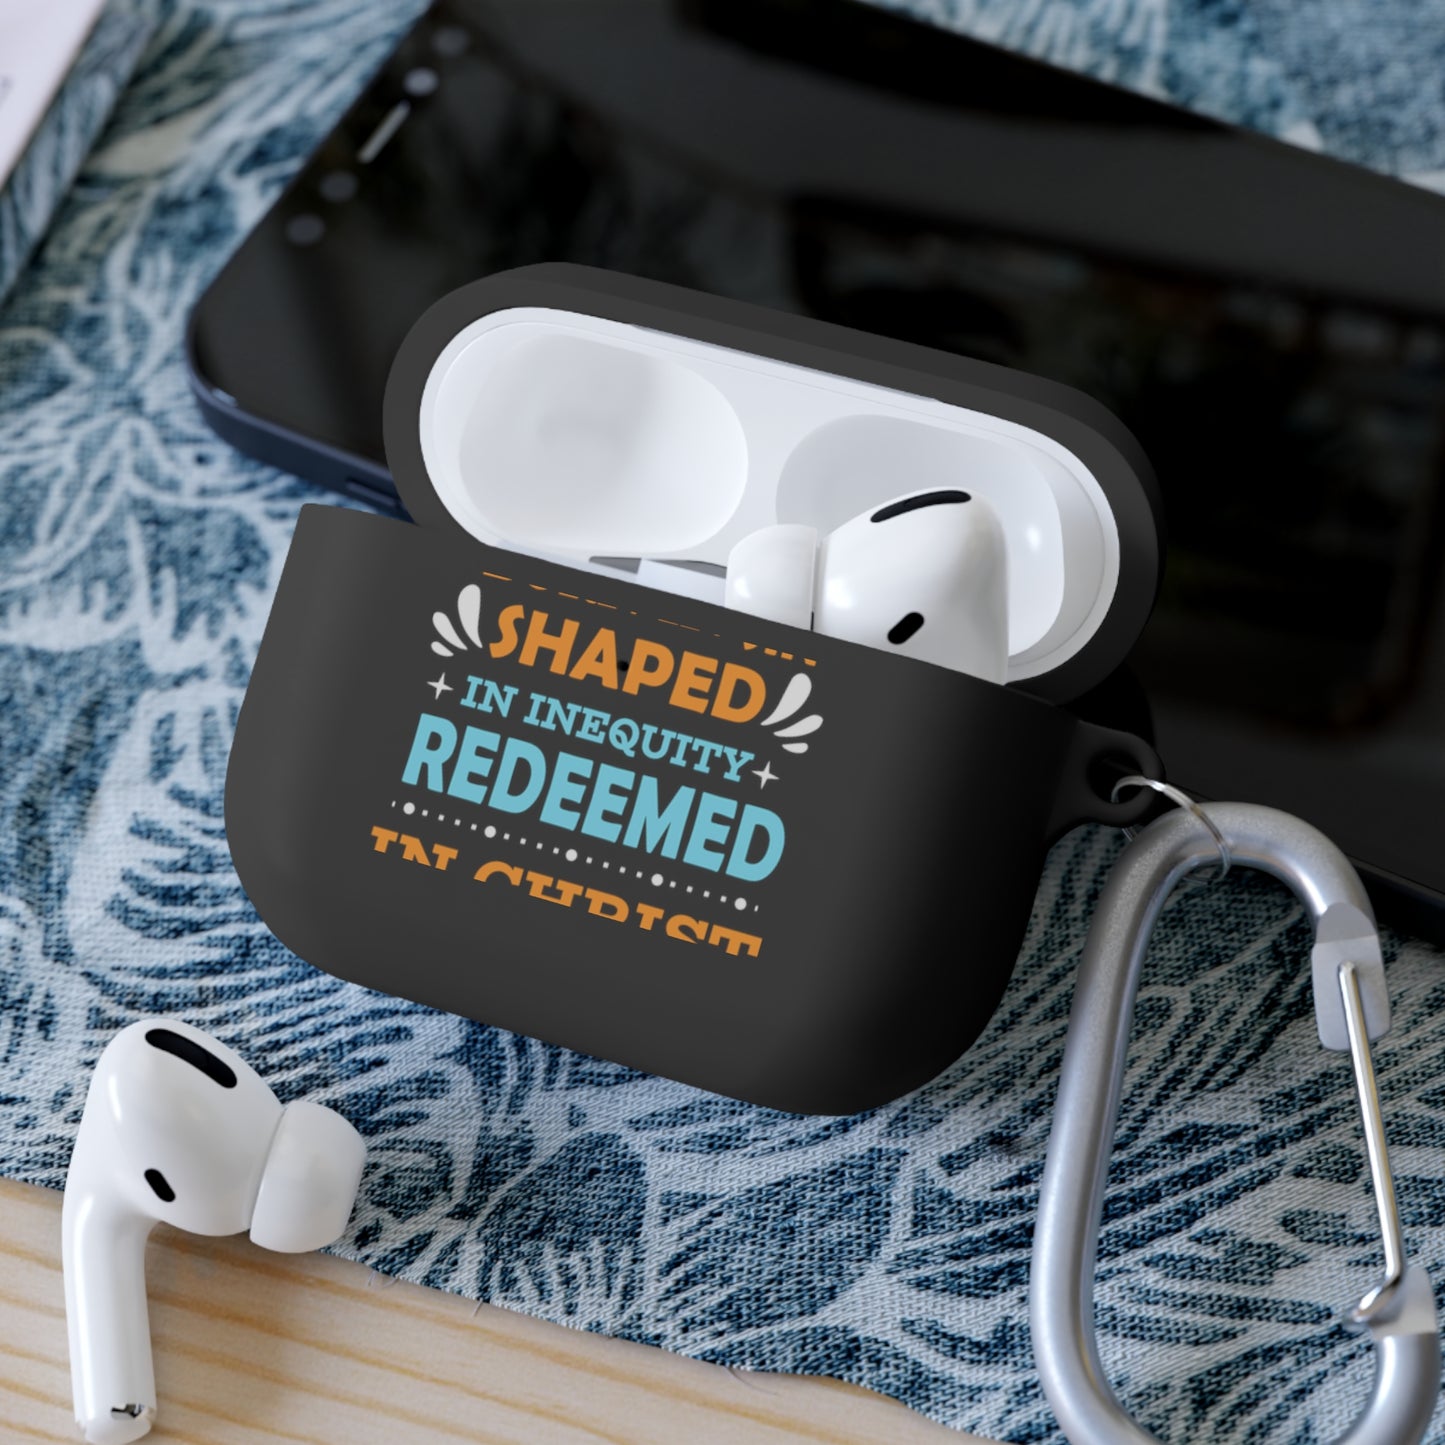 Born In Sin Shaped In Inequity Redeemed In Christ Airpod / Airpods Pro Case cover